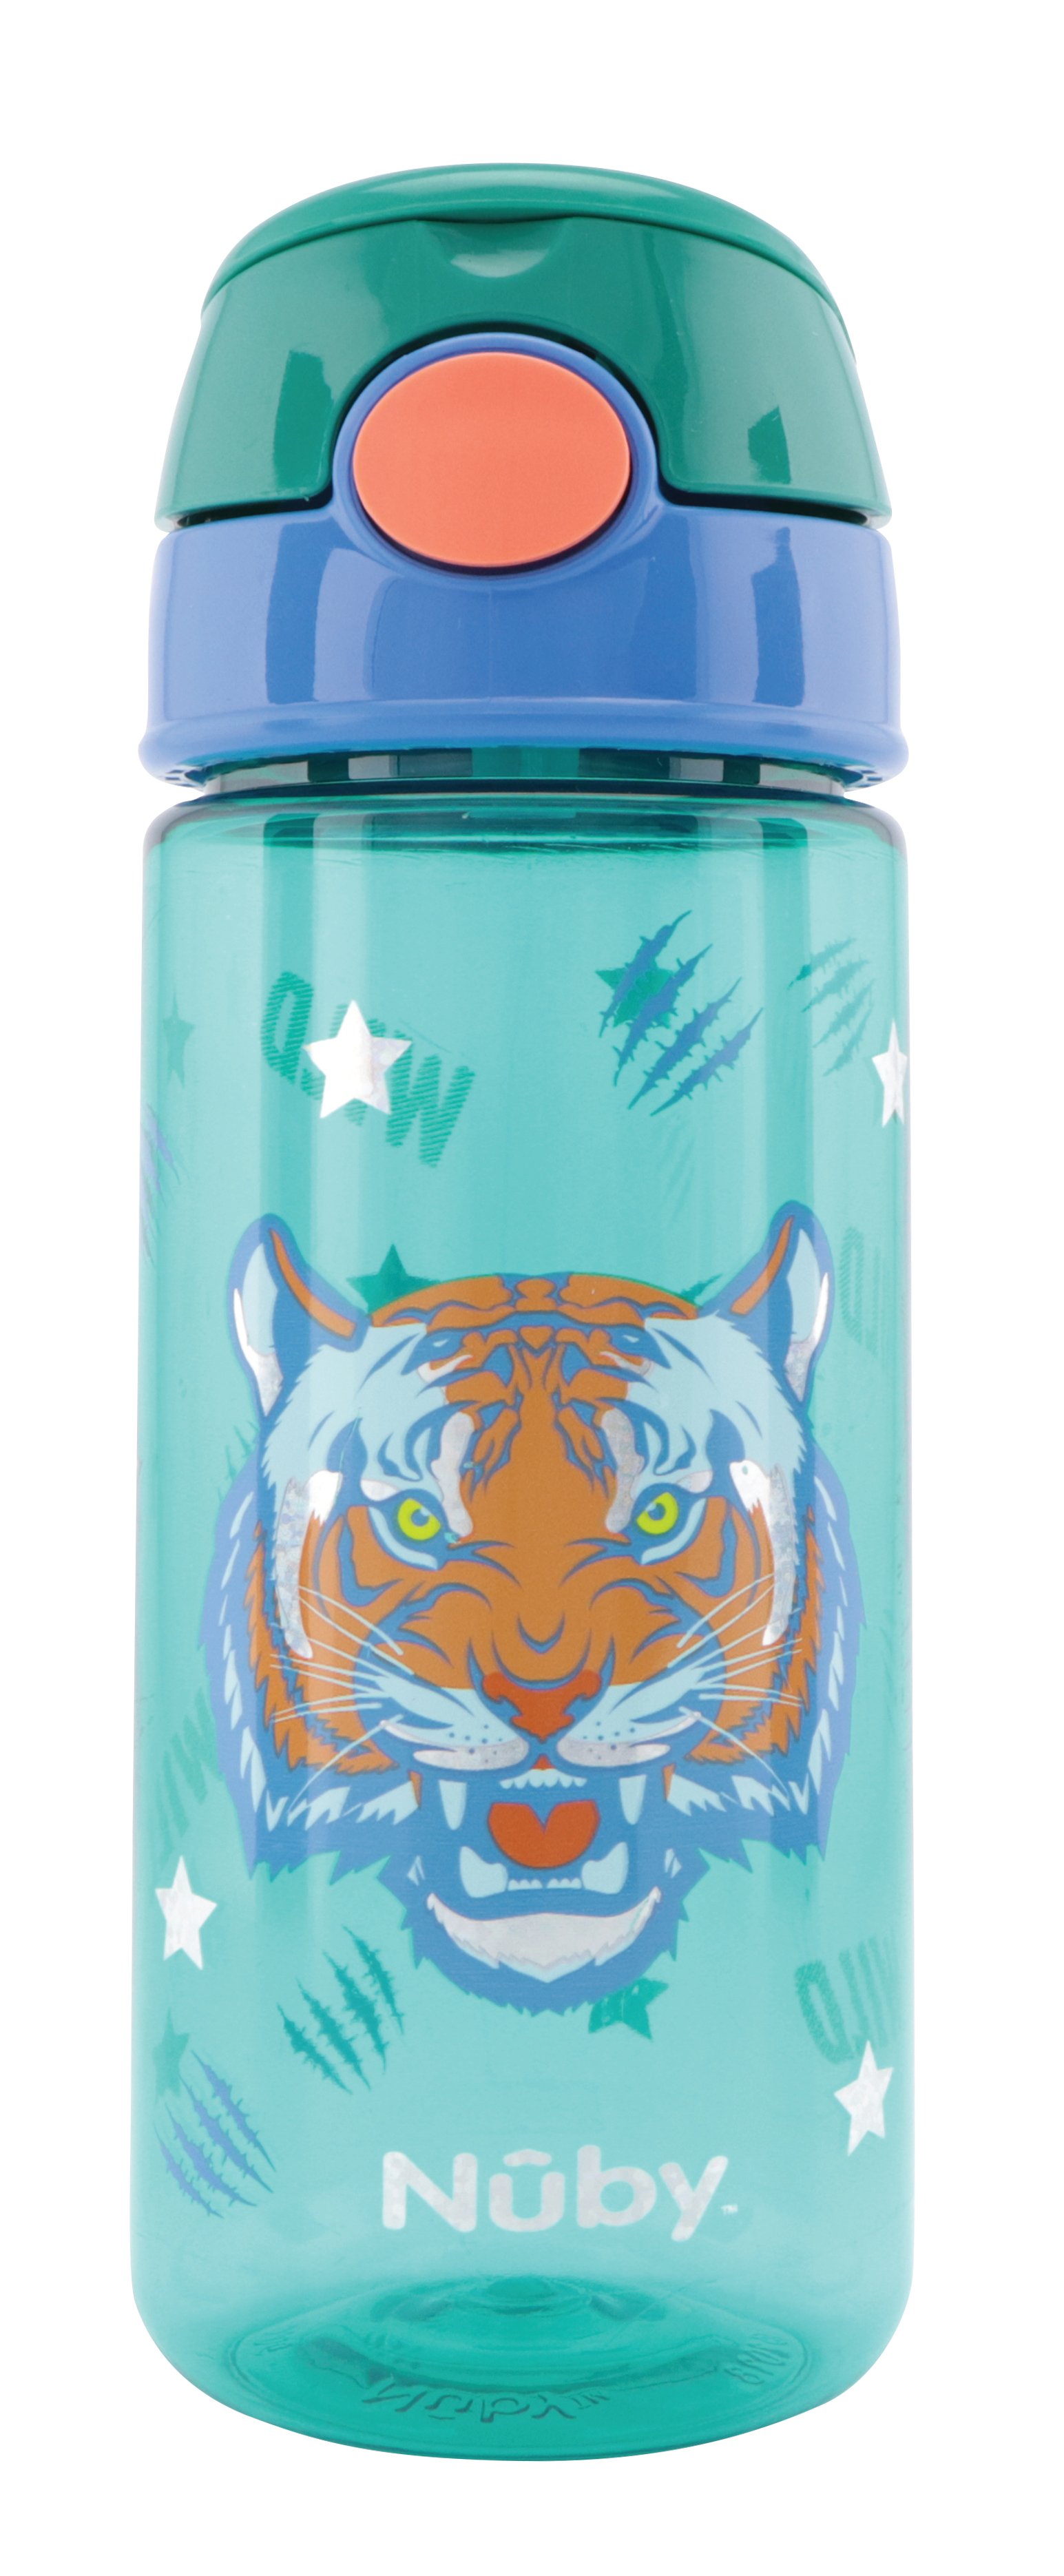 Nuby Soft Straw Push Cup with Glitter 540ml Tiger